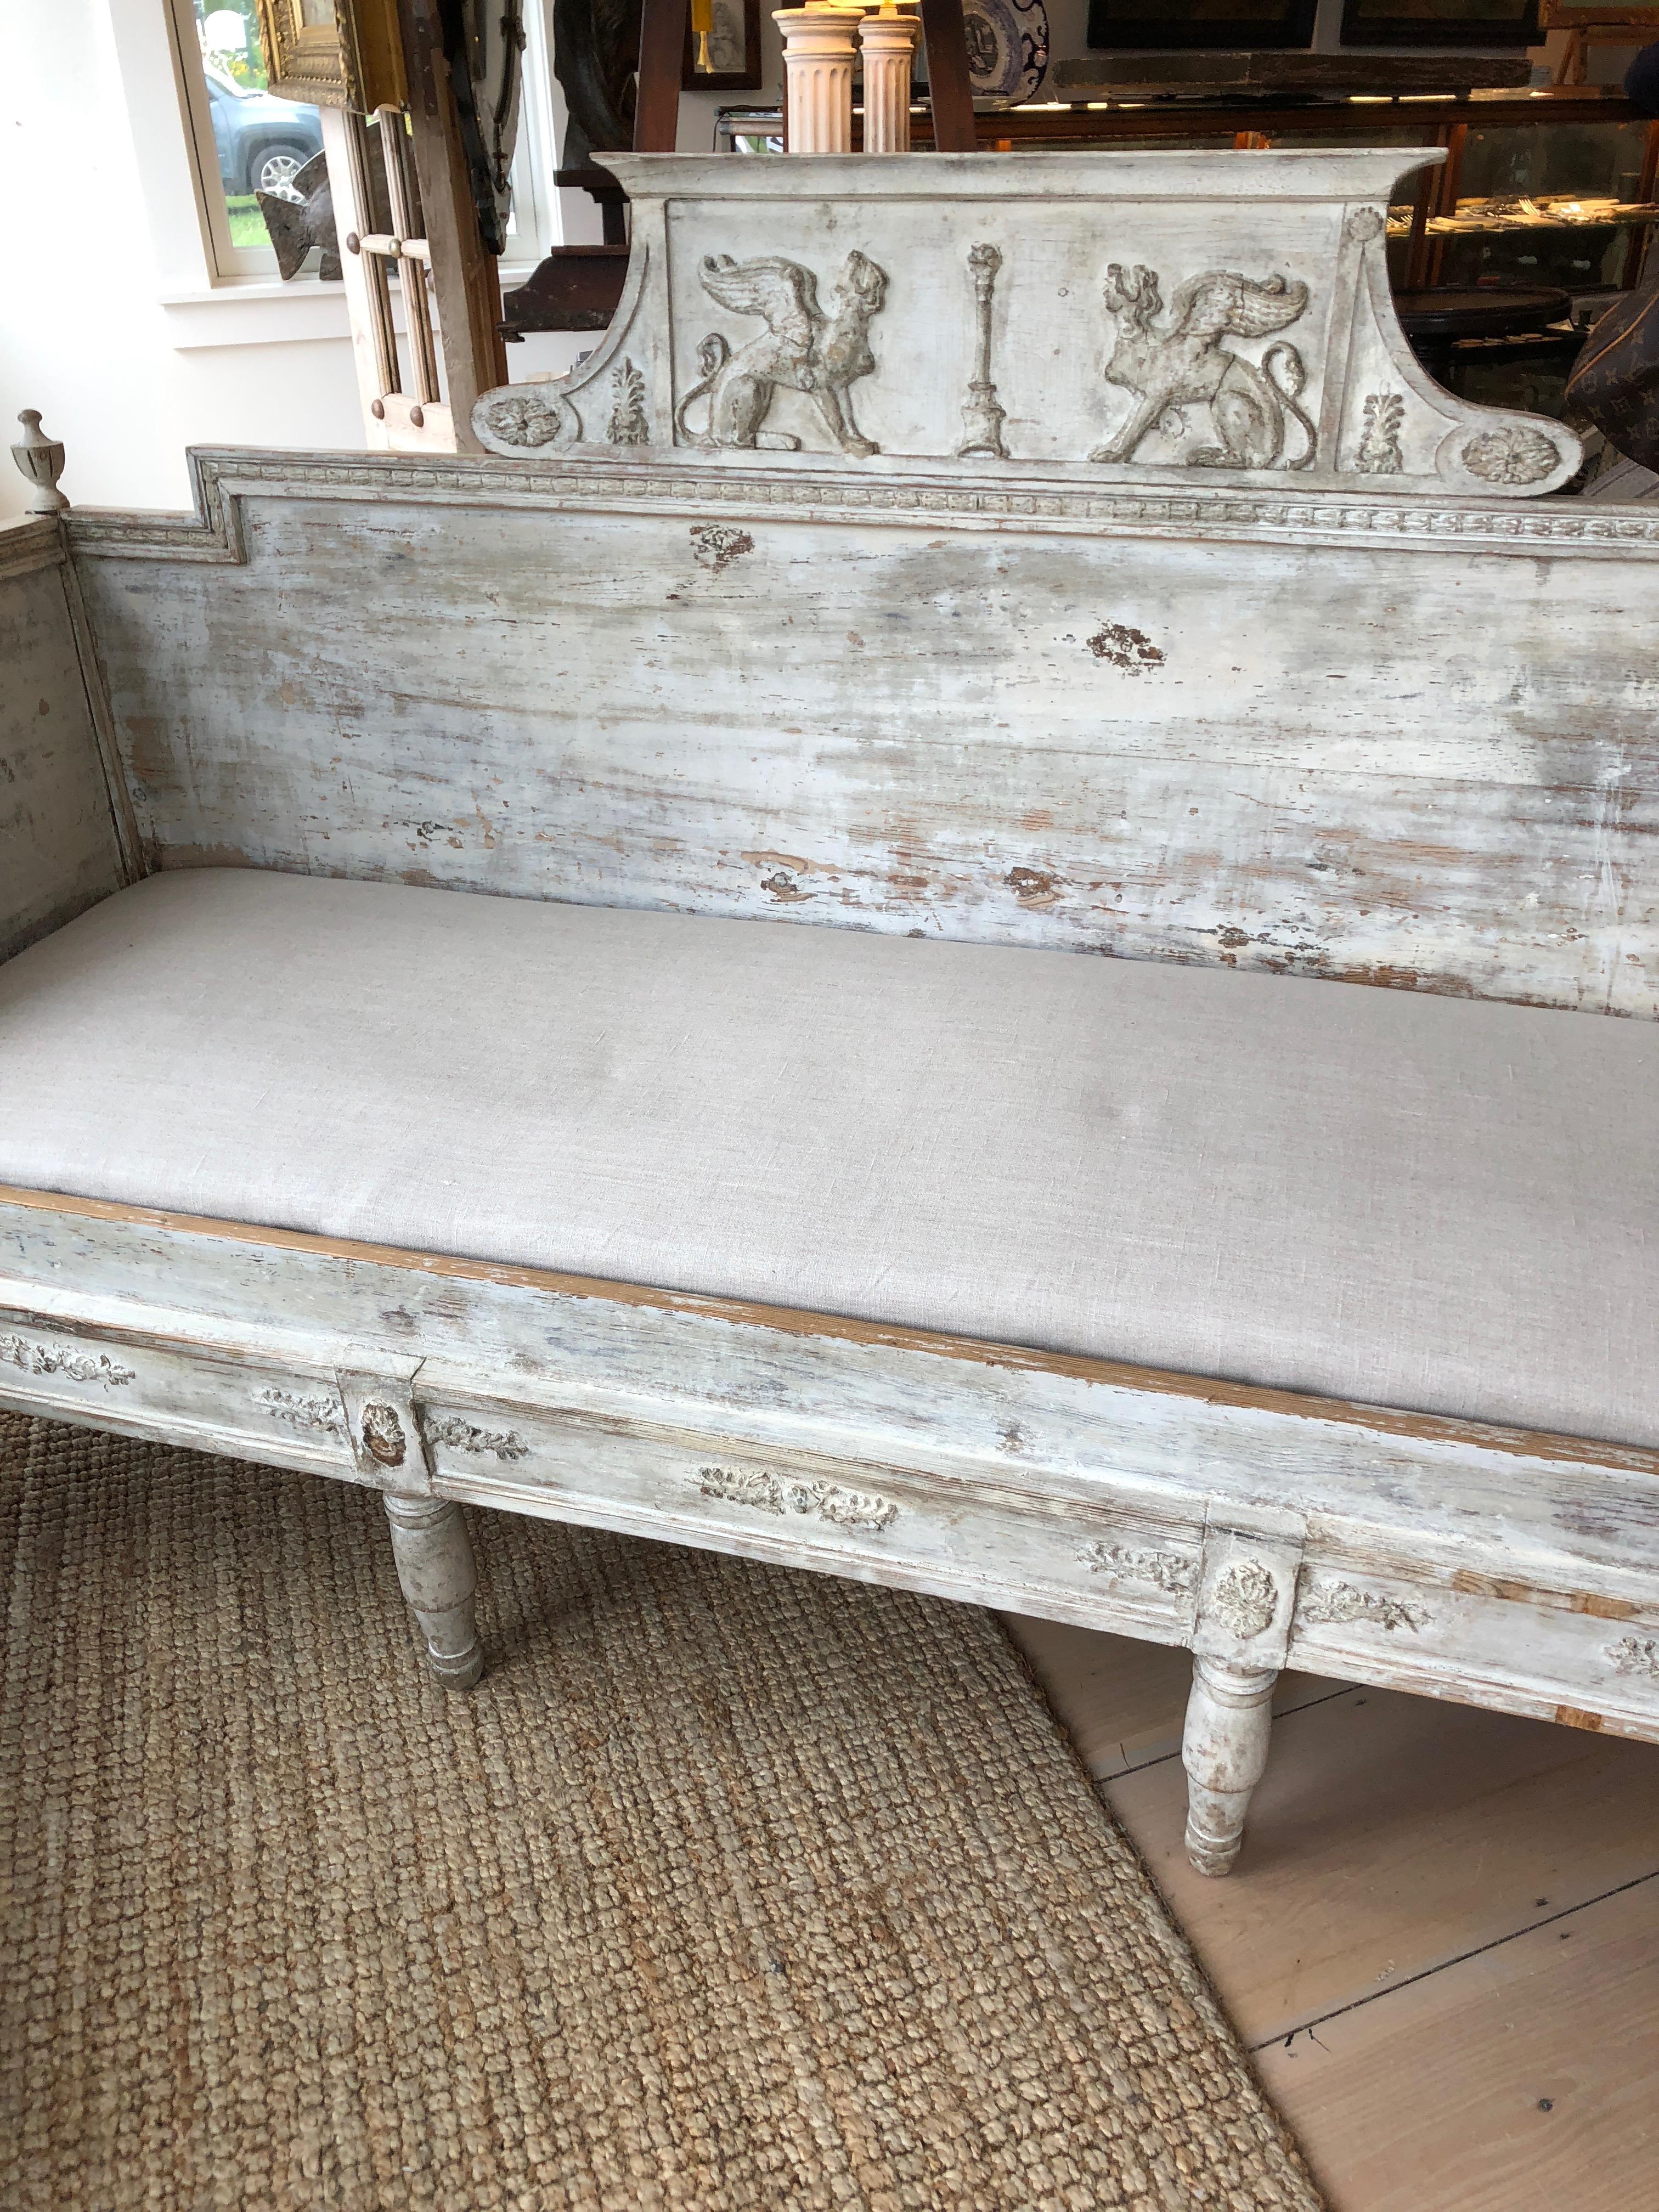 A Swedish Gustavian painted settee or sofa in a gorgeous antiqued grayish white, with beautifully carved figures and original detail. Upholstered cushion seat.
Measures: seat depth 23.